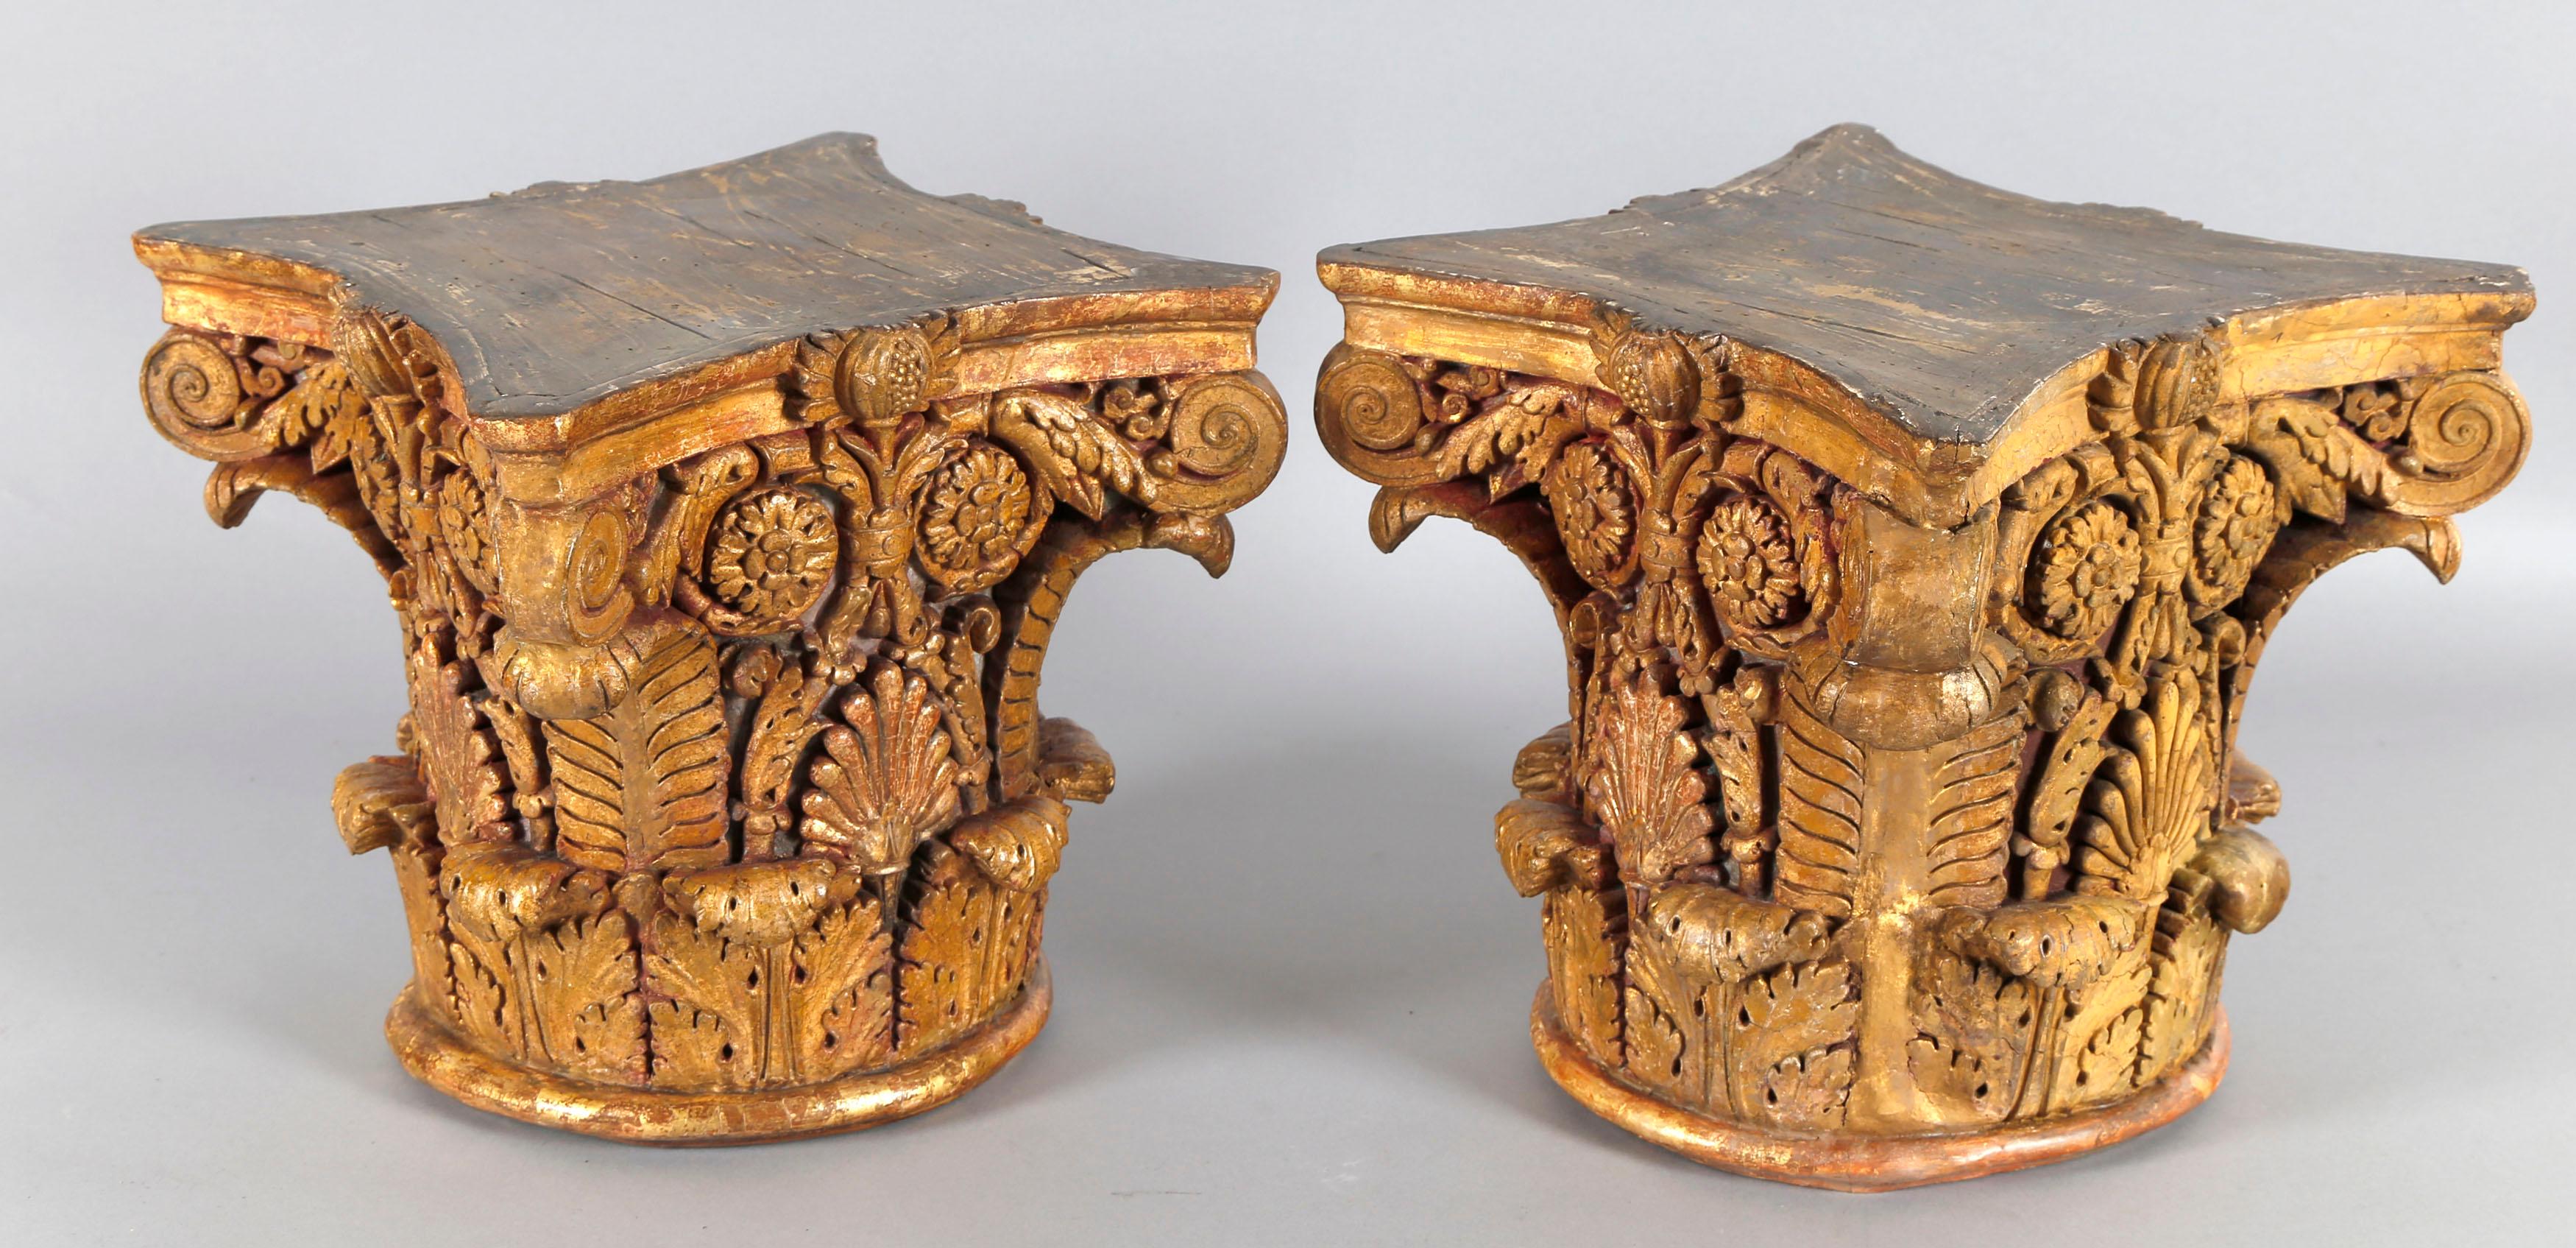 A pair of French richly carved, circa 1790 Corinthian capitals. Beautiful details and excellent condition of the gilding. Louis XVI, France, circa 1790. 

Place these on top of simple white square pedestals for a richly layered yet minimal look.